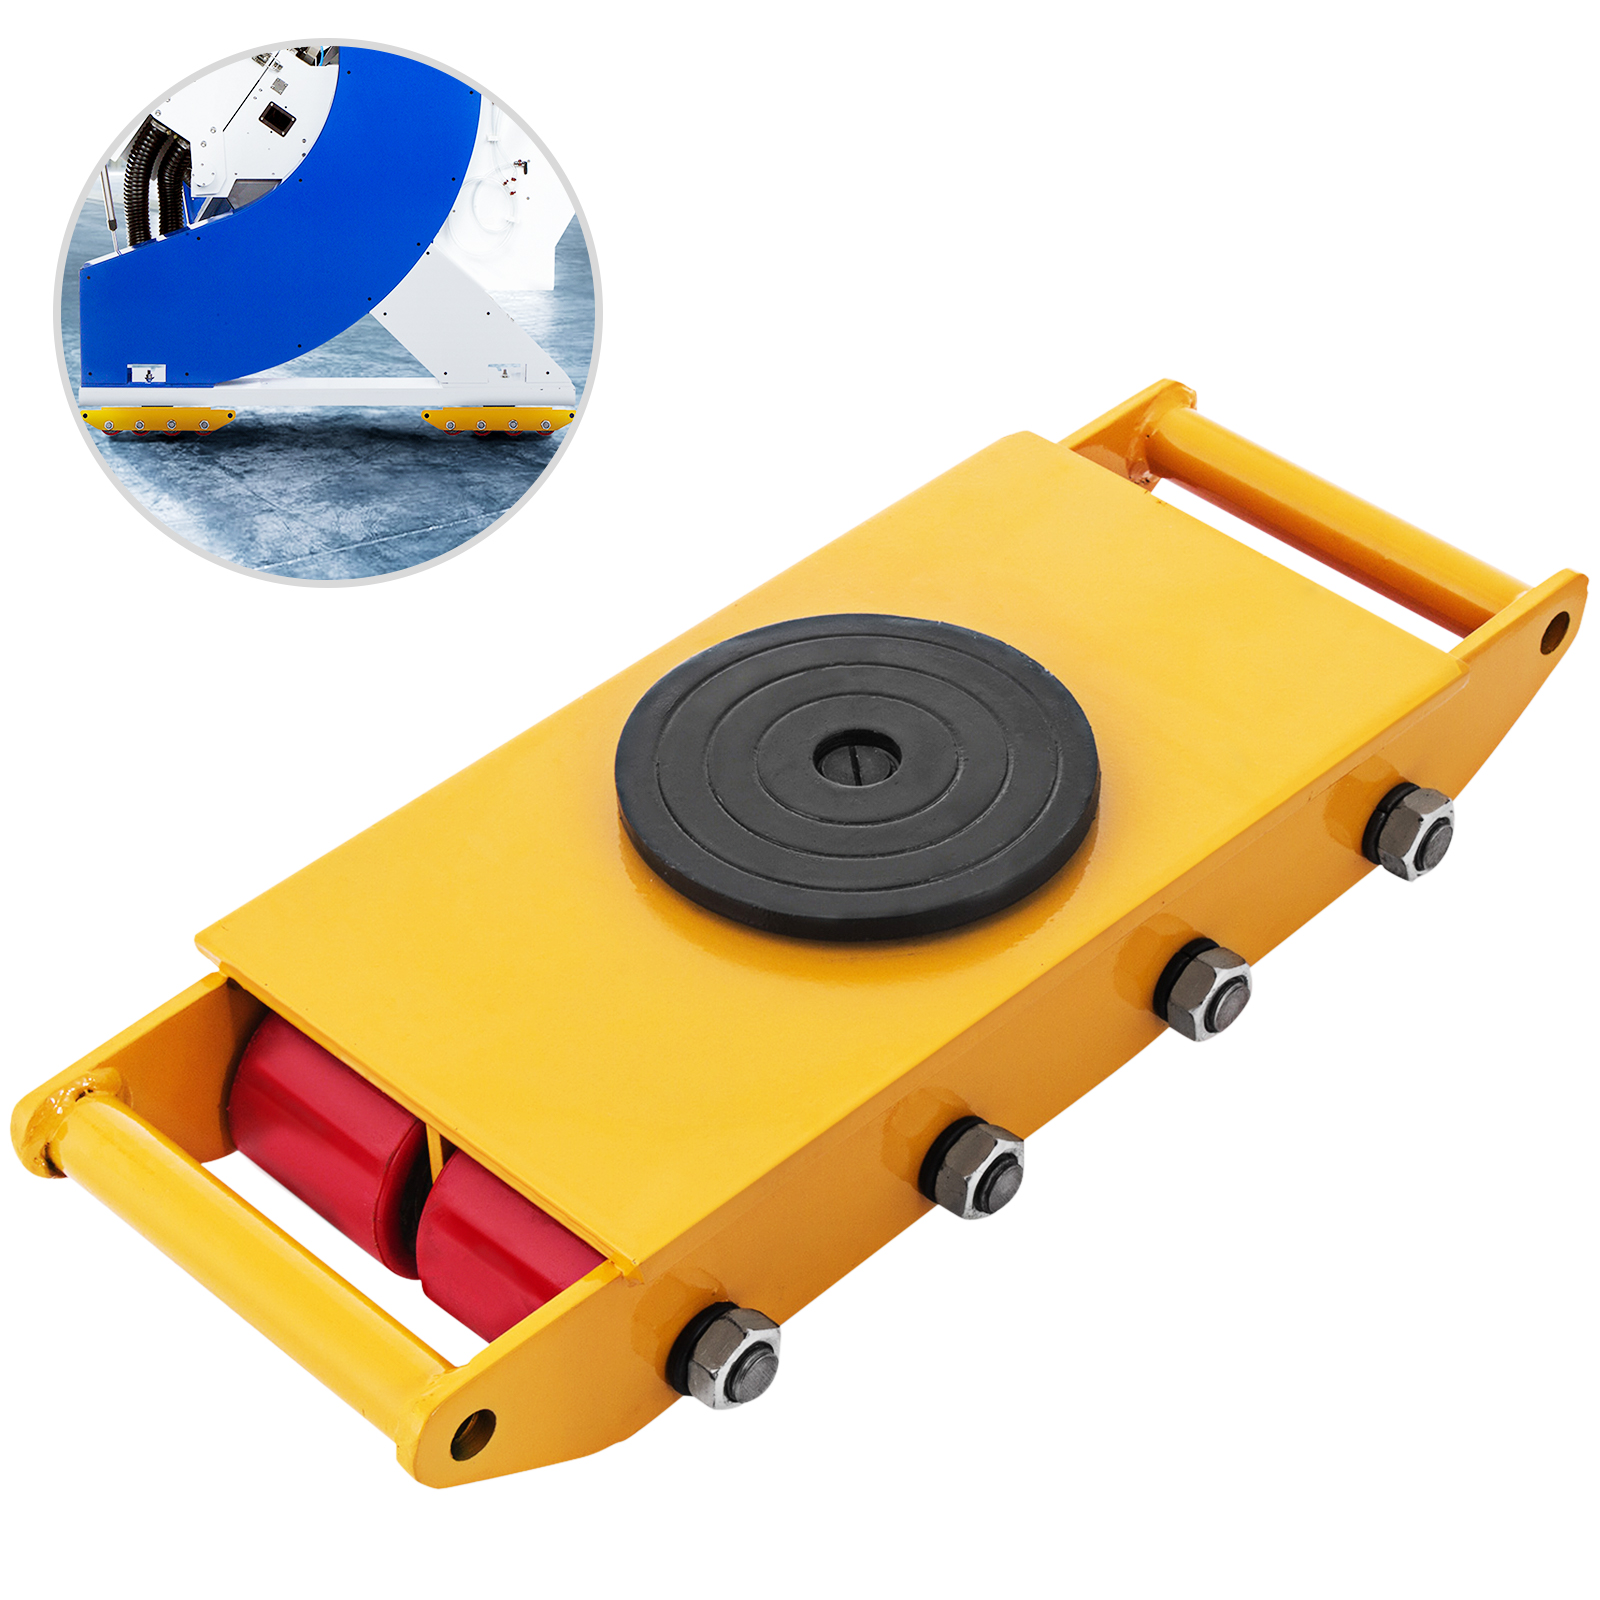 Yellow 12 Ton Machinery Mover Skate 360°rotation steel 8 Rollers 26400LBS US 